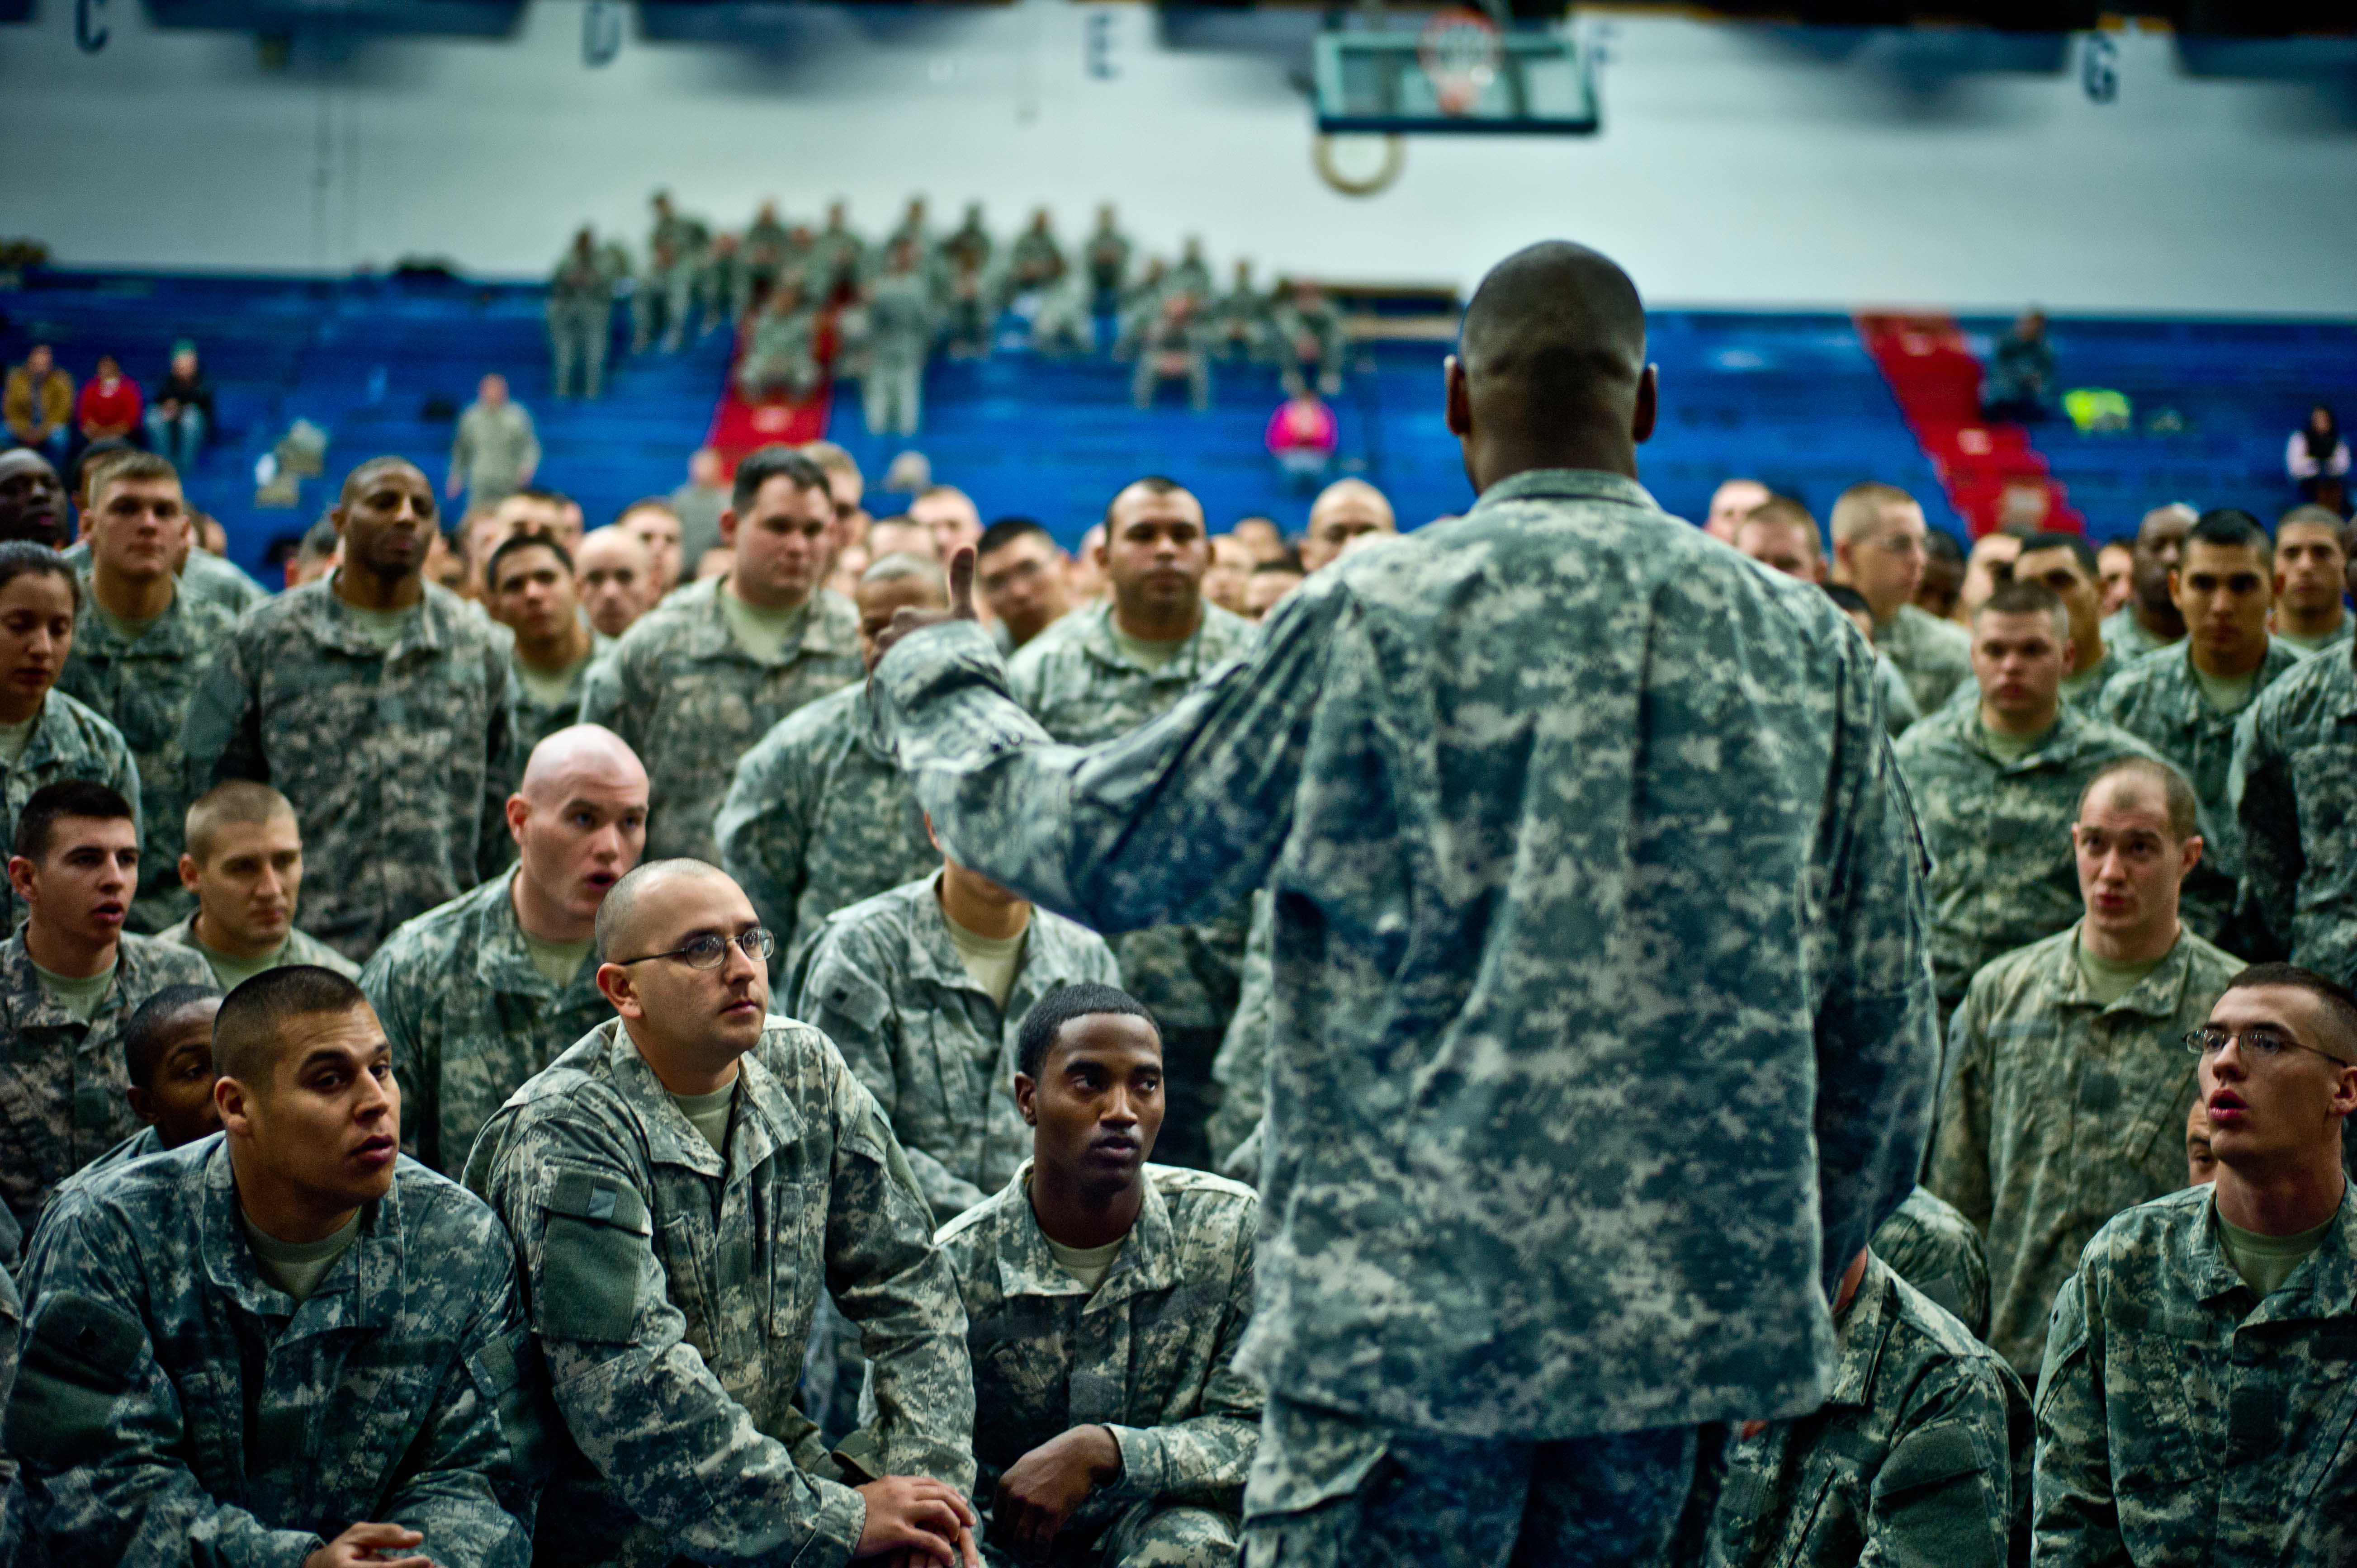 20120213-A-RE761-002: Soldiers receive a safety brief before the start of the 2012 Fort Hood Combatives Championship preliminaries Feb. 13 at the Abrams Physical Fitness Center on base.